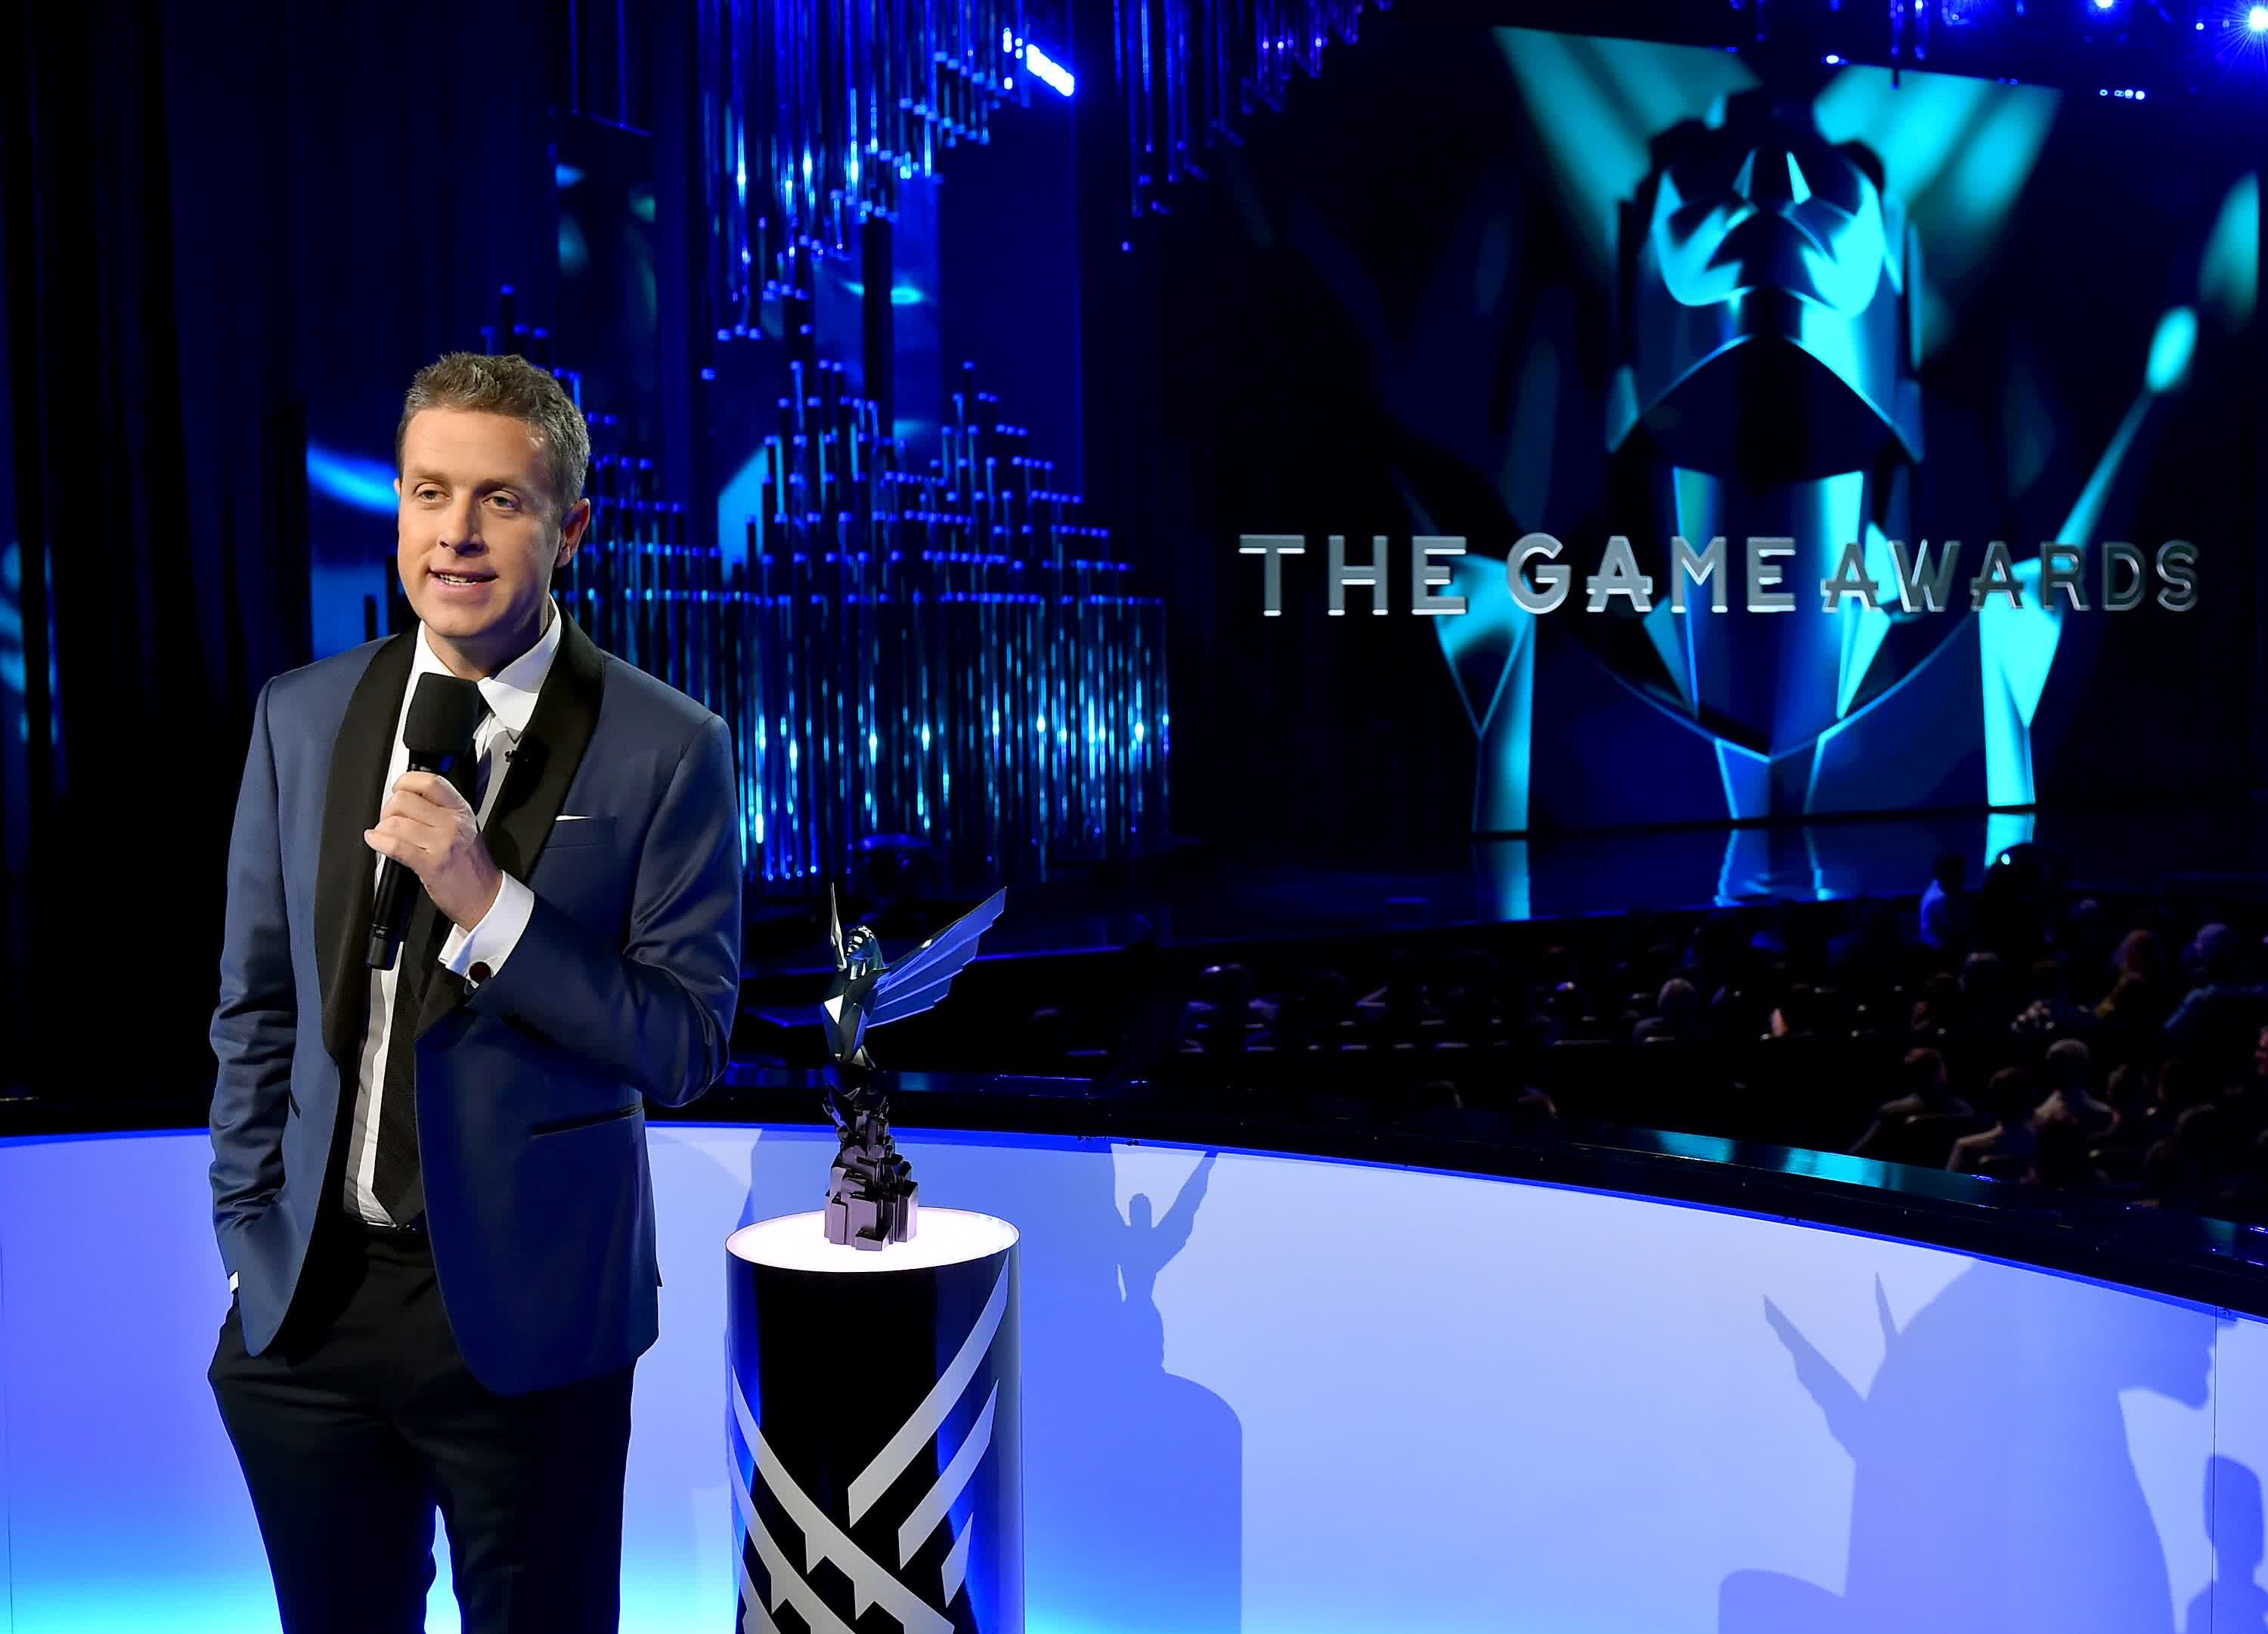 The Game Awards has opened up voting for the Player's Choice category